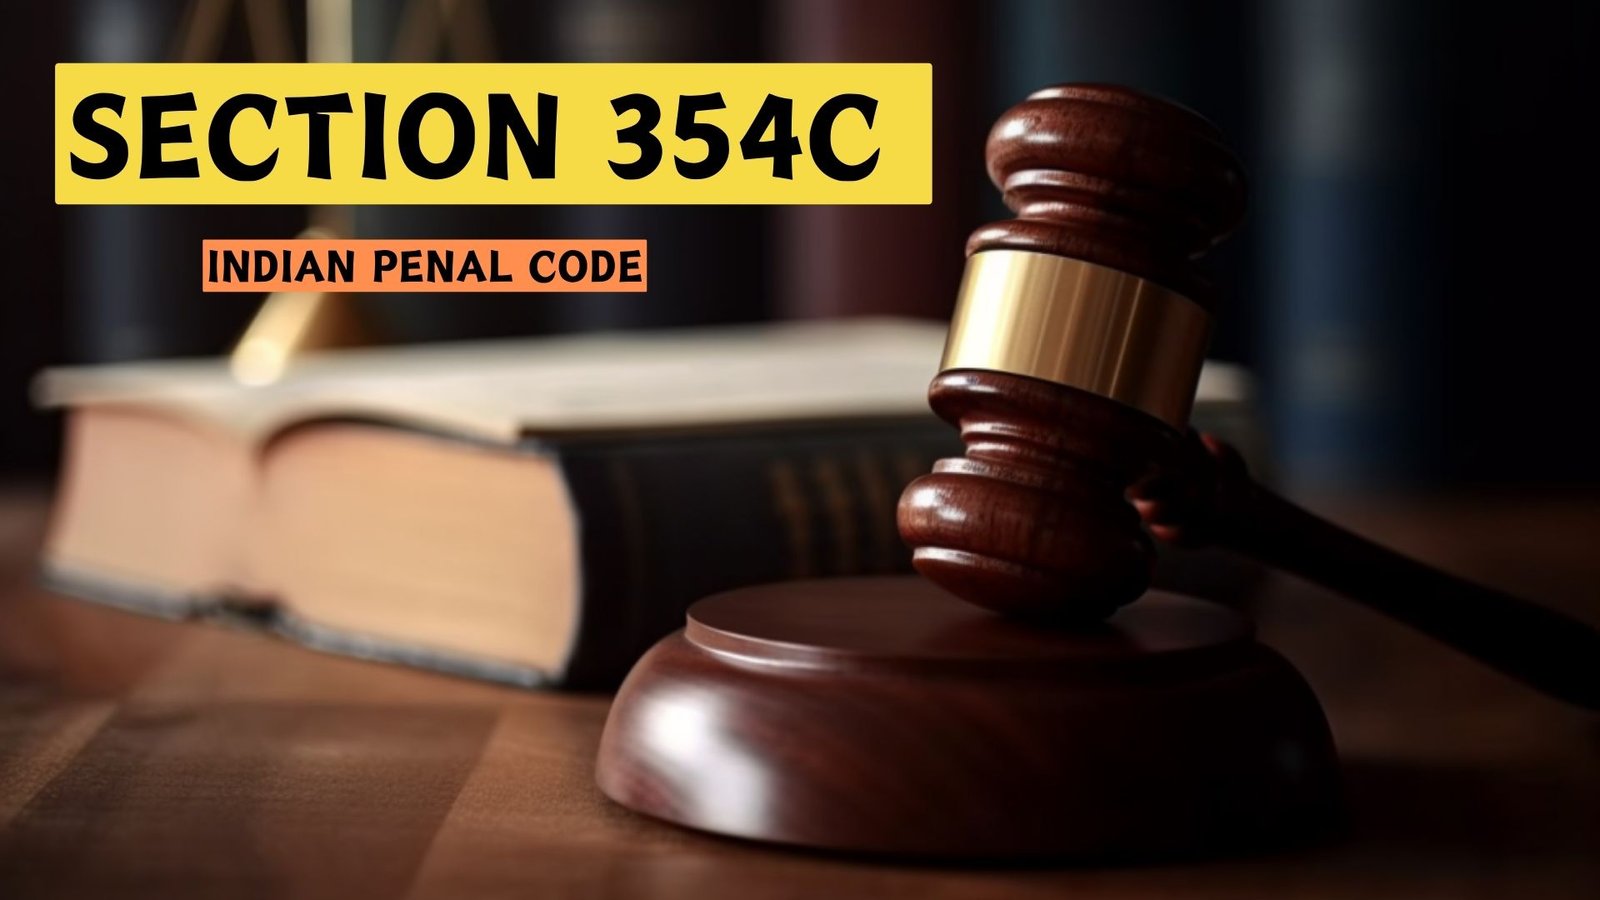 Section 354C of the Indian Penal Code, Lawforeverything